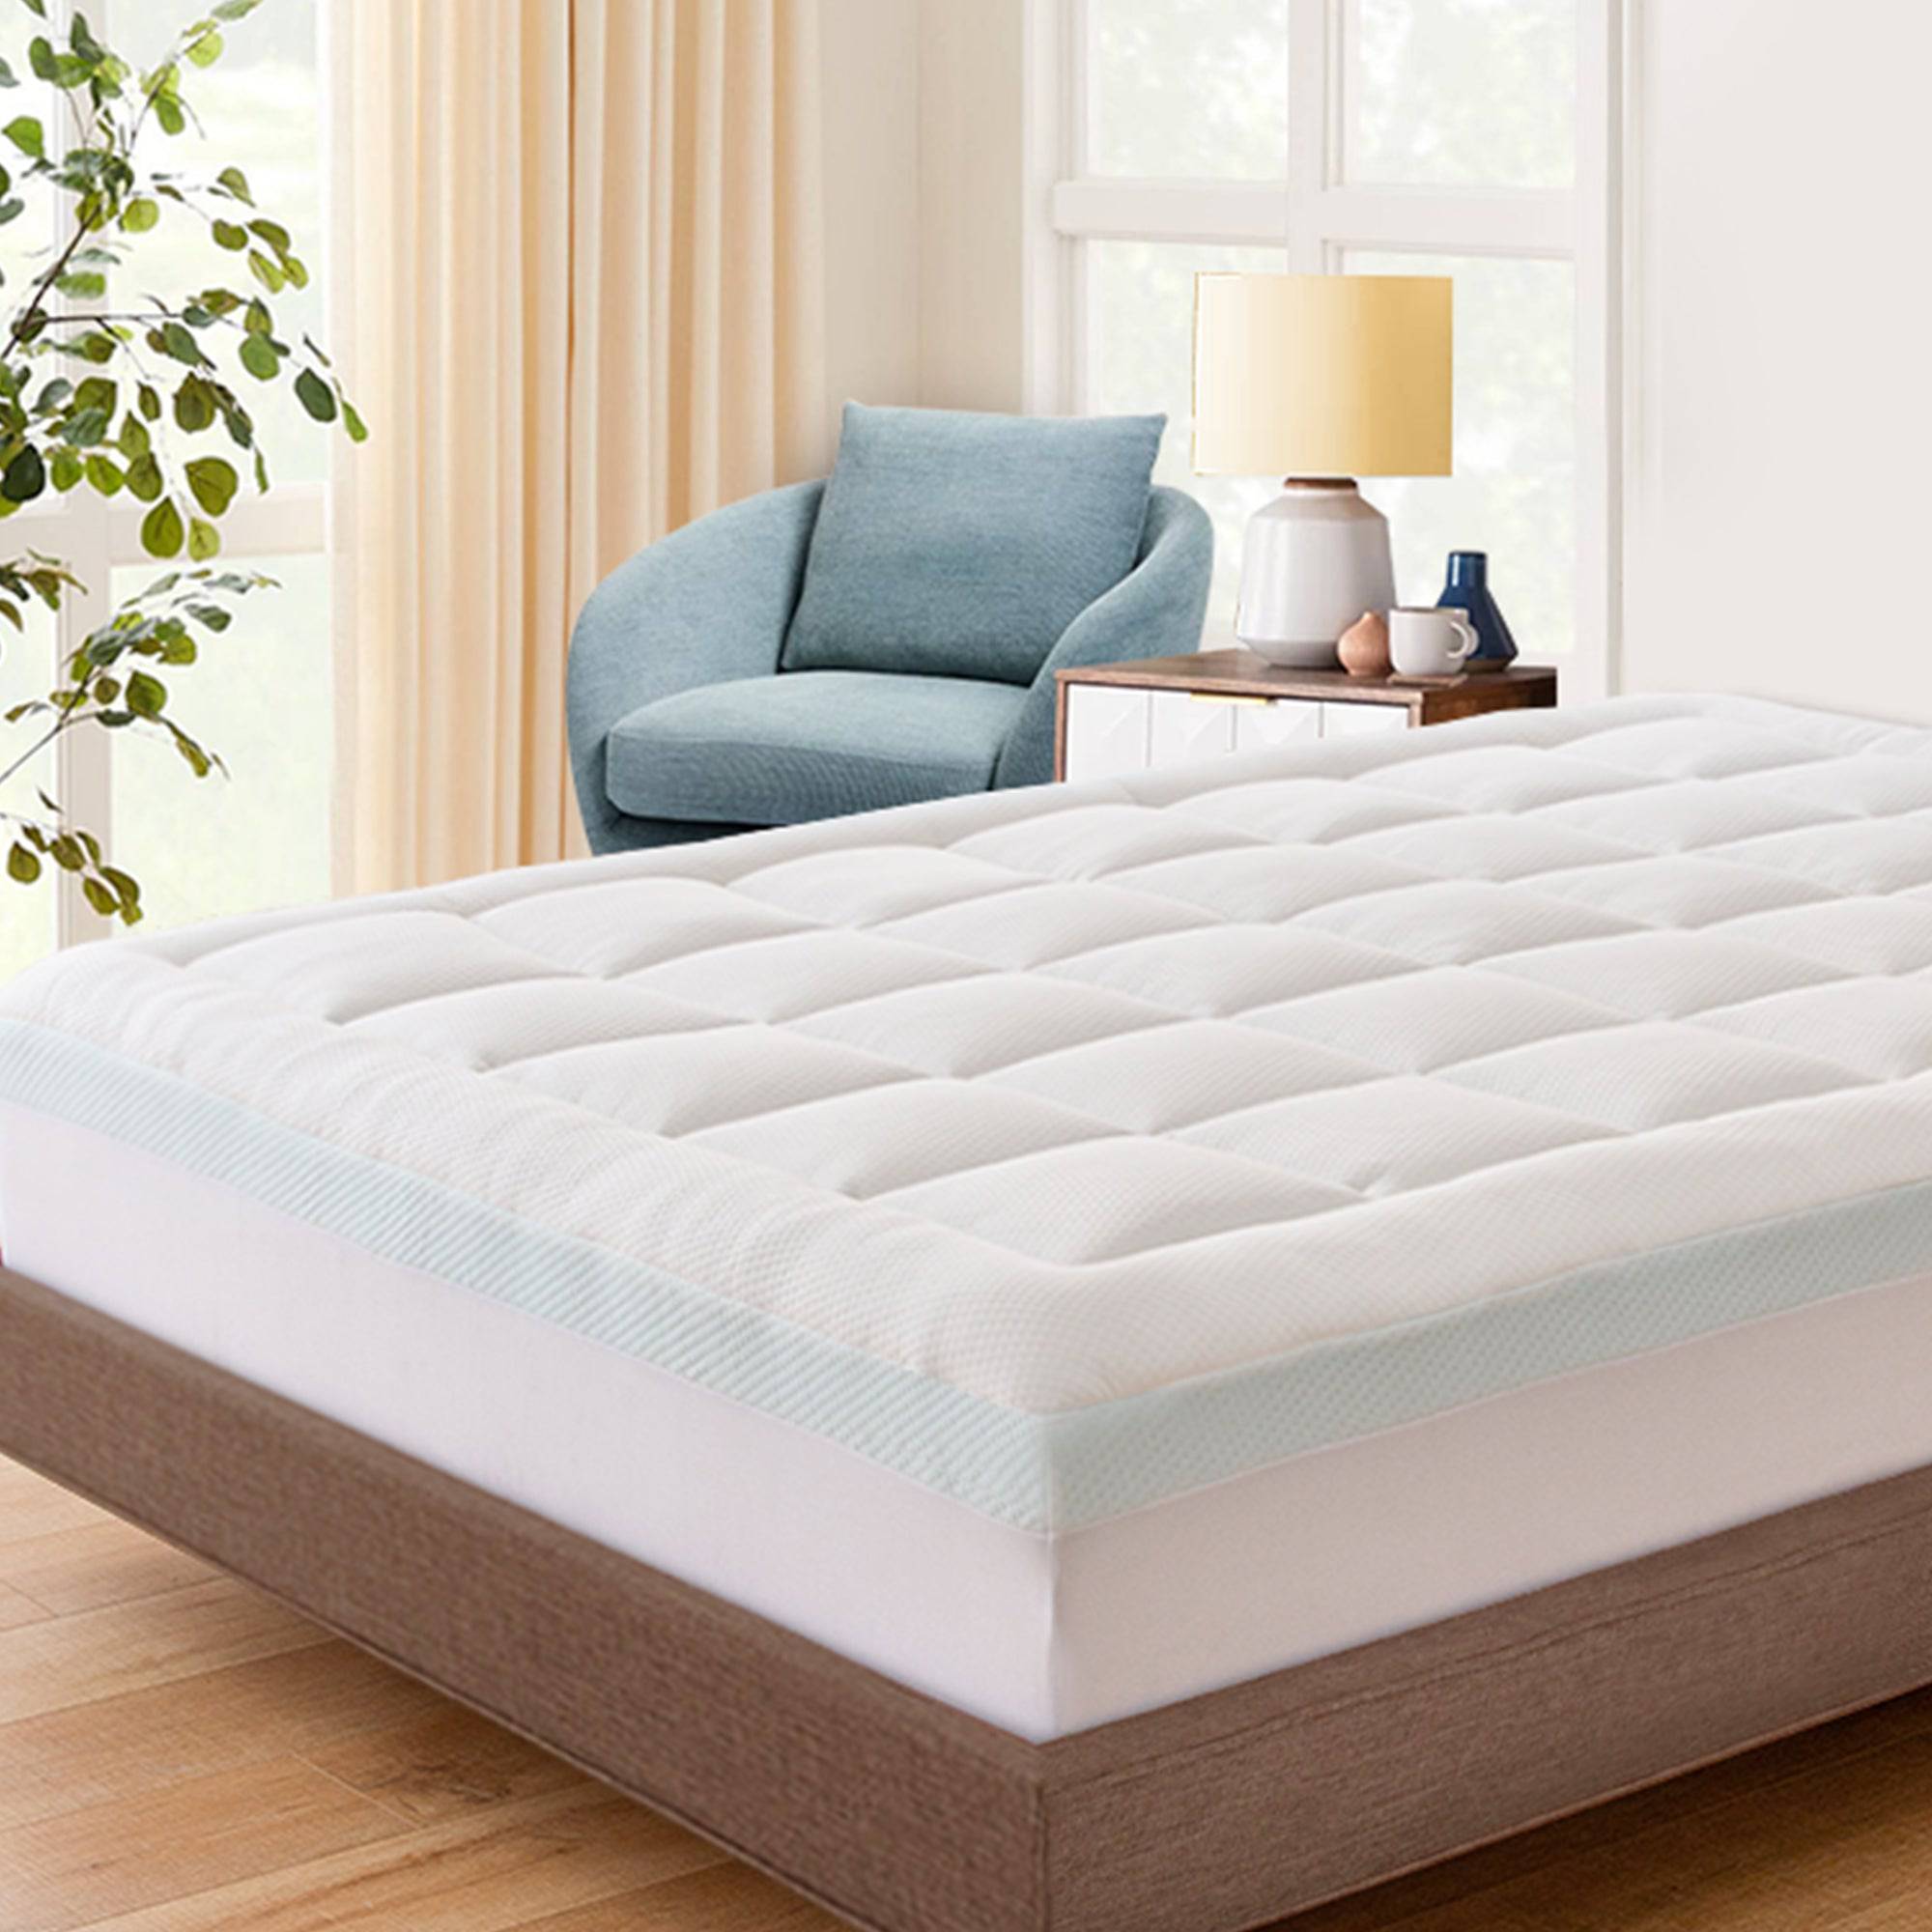 How to Keep a Mattress from Sliding - eachnight